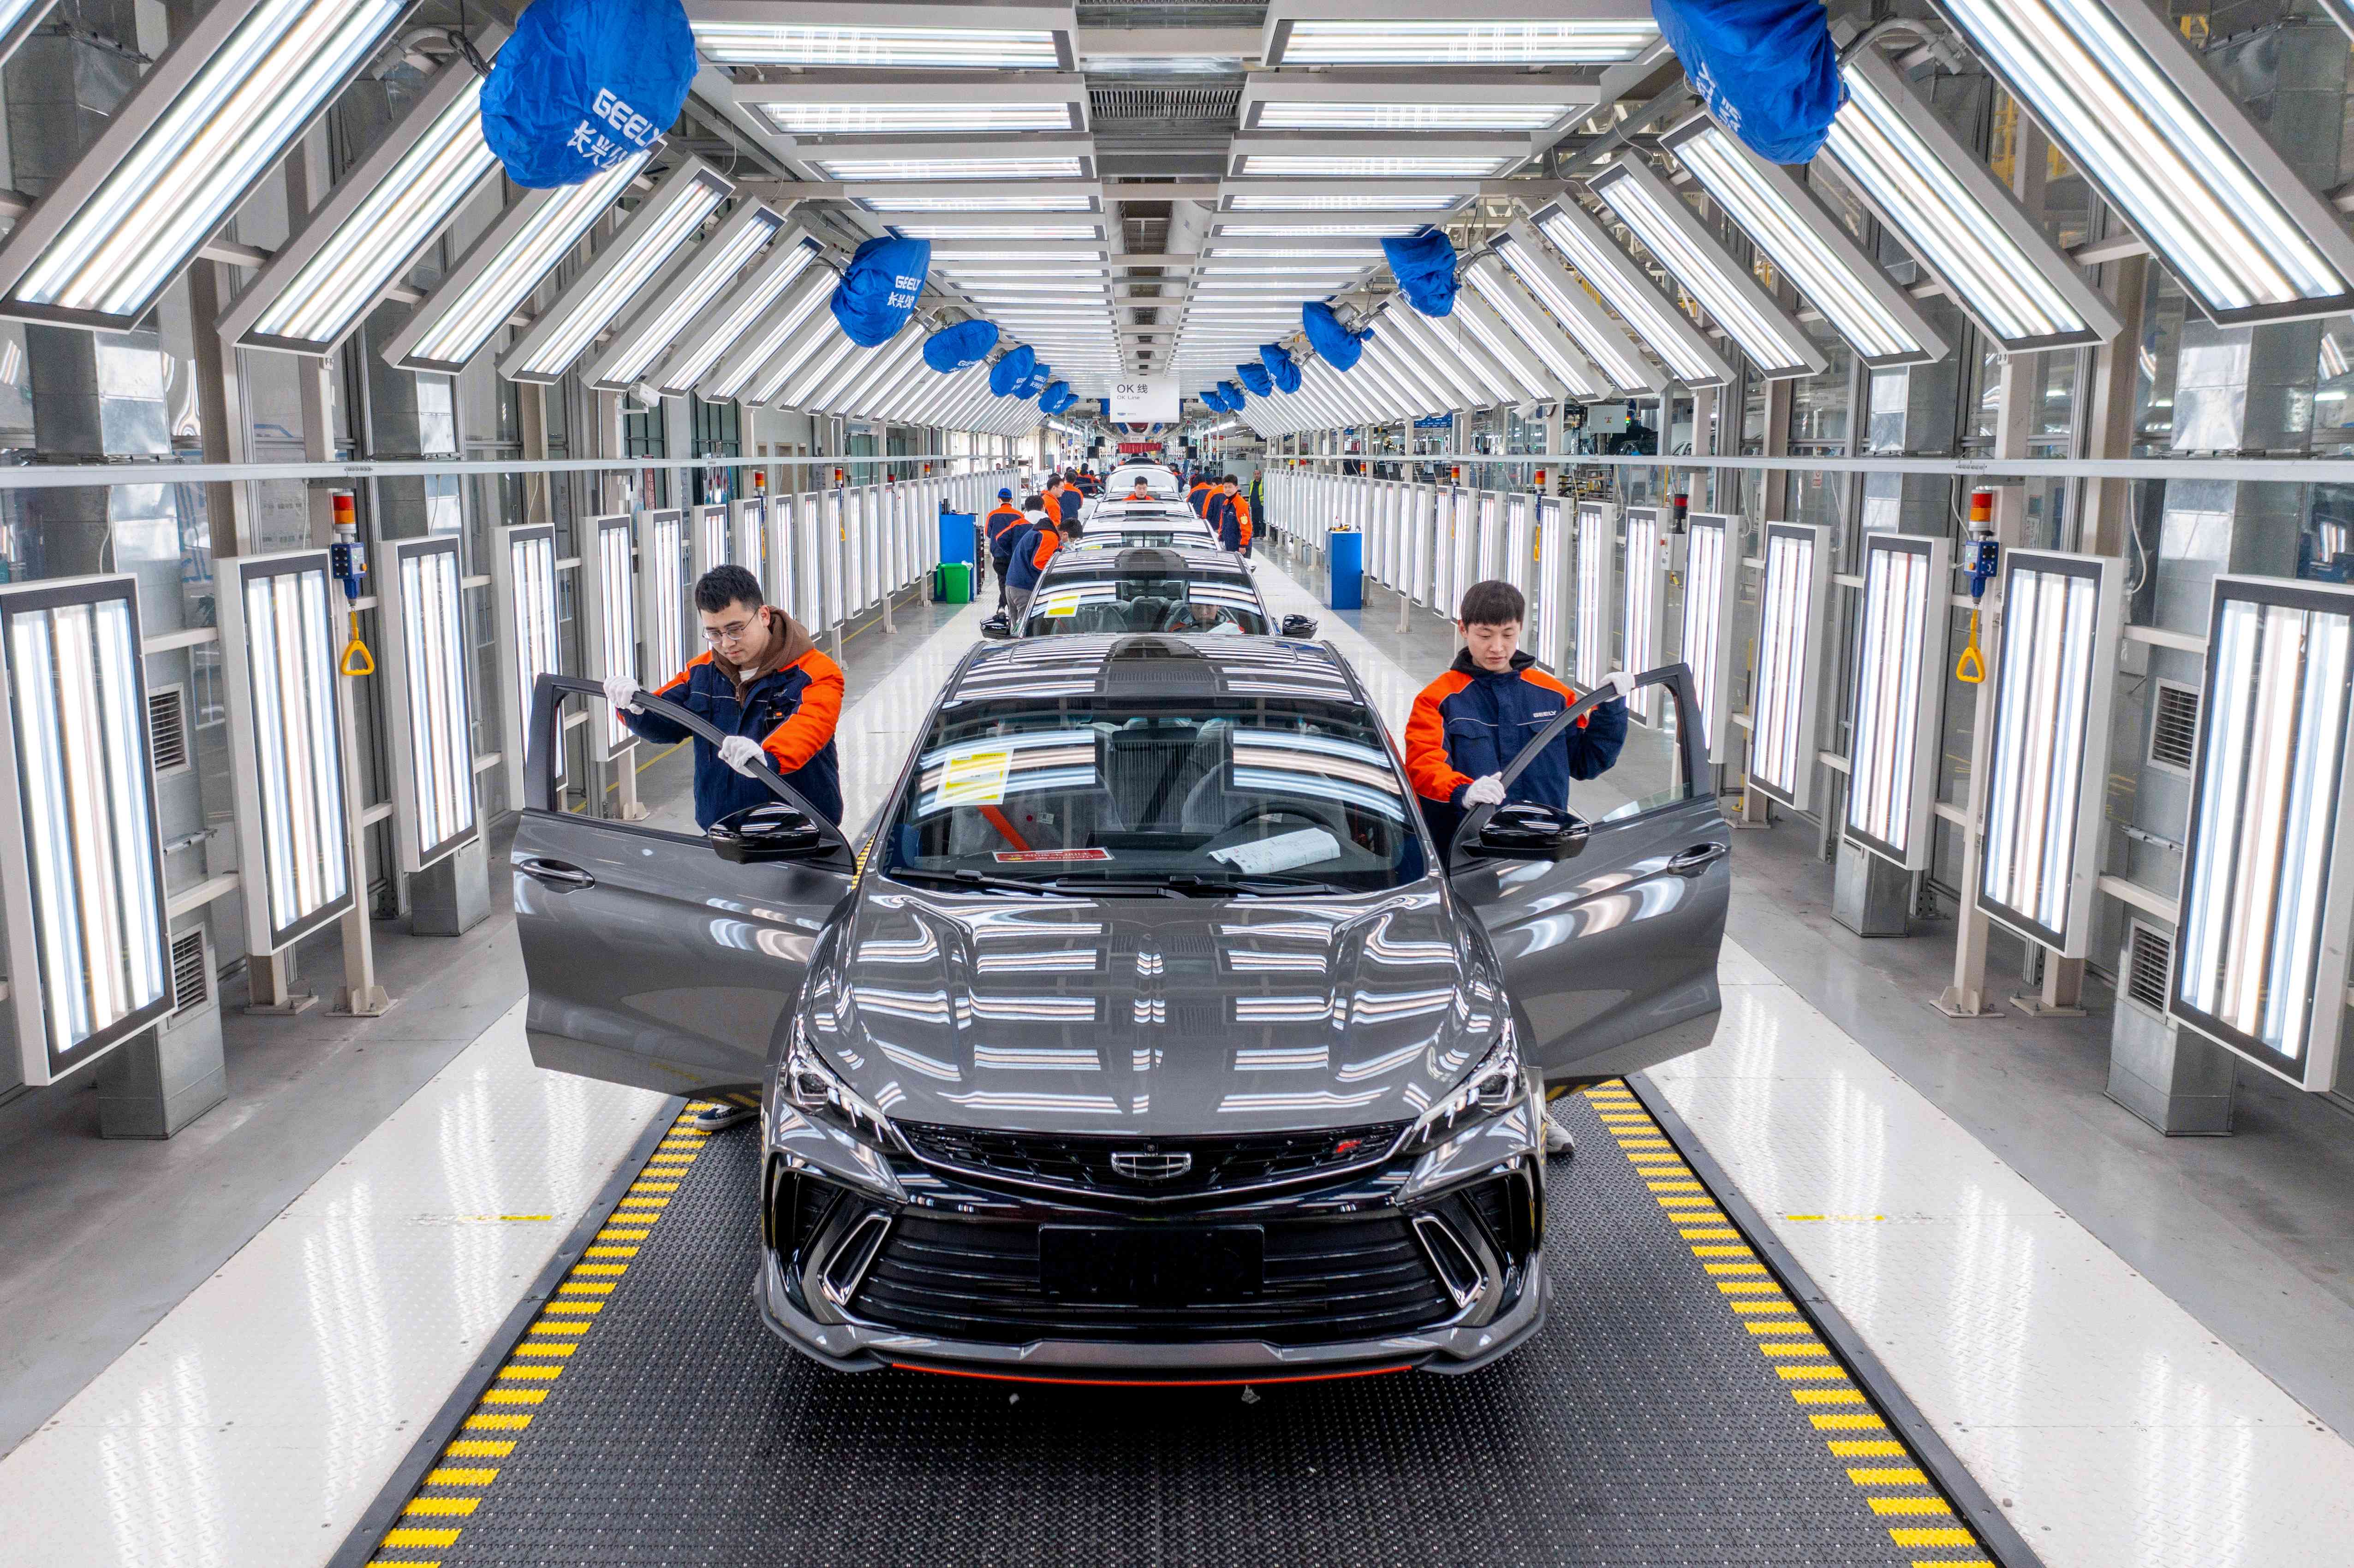 Two people on either side of a new car in a manufacturing facility in China.